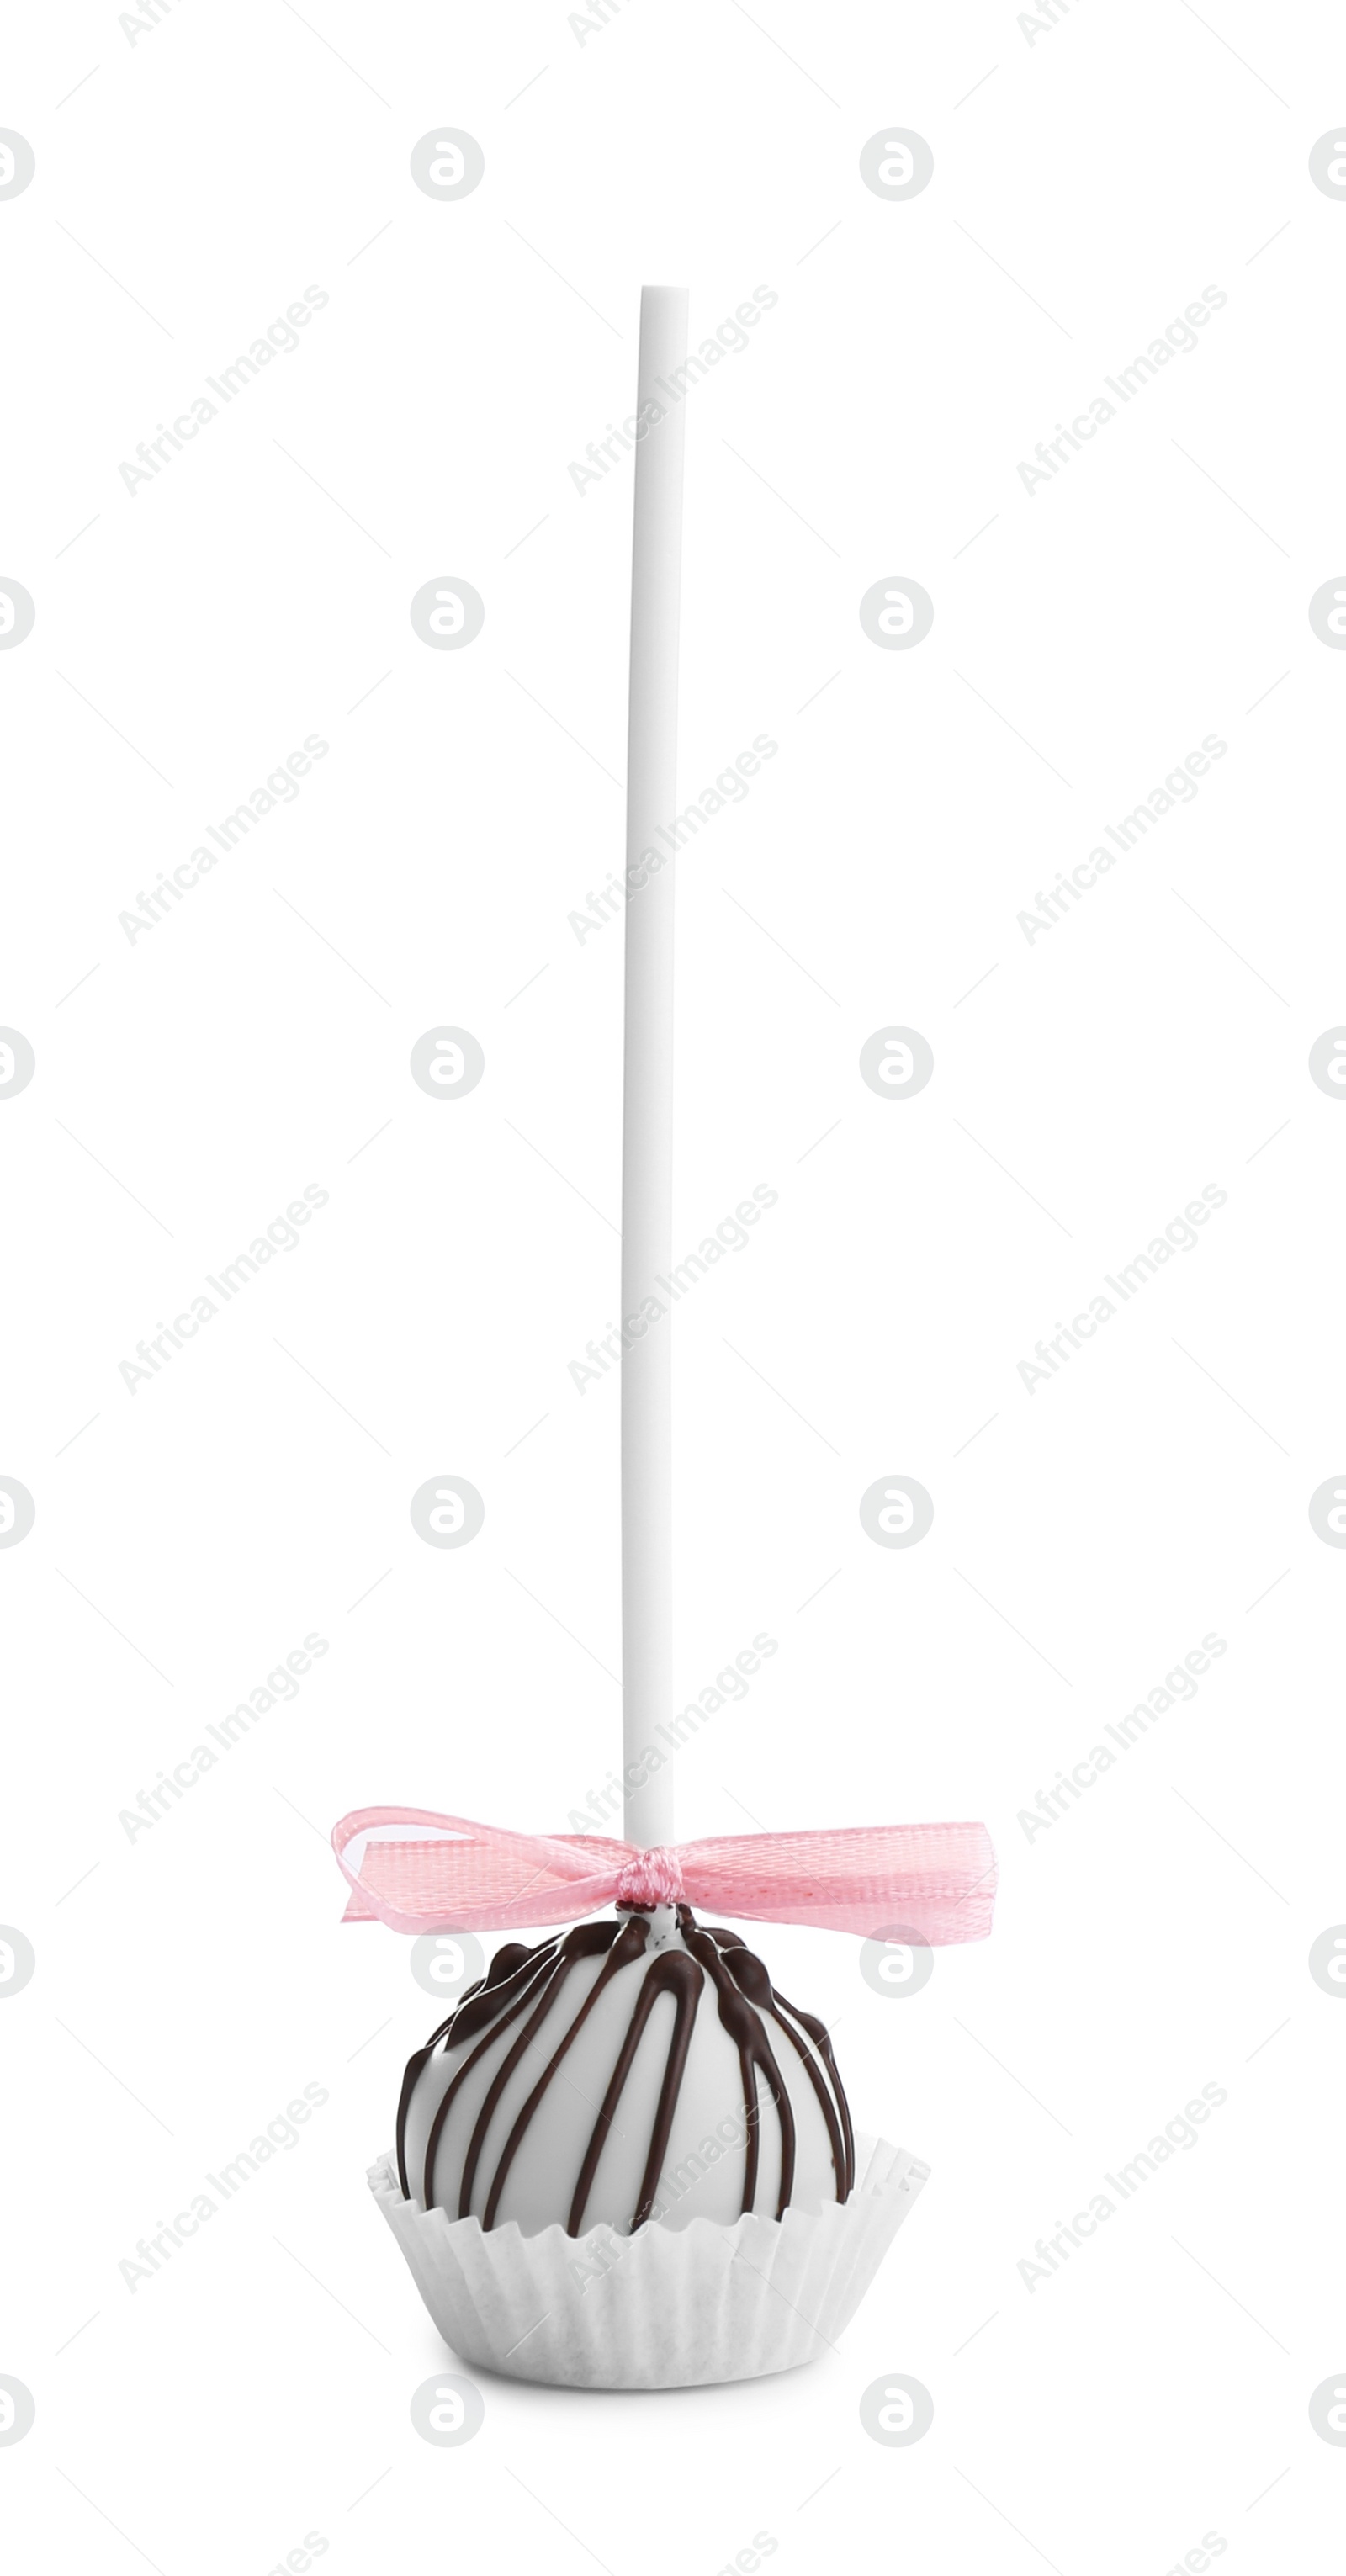 Image of Tasty cake pop with chocolate on white background